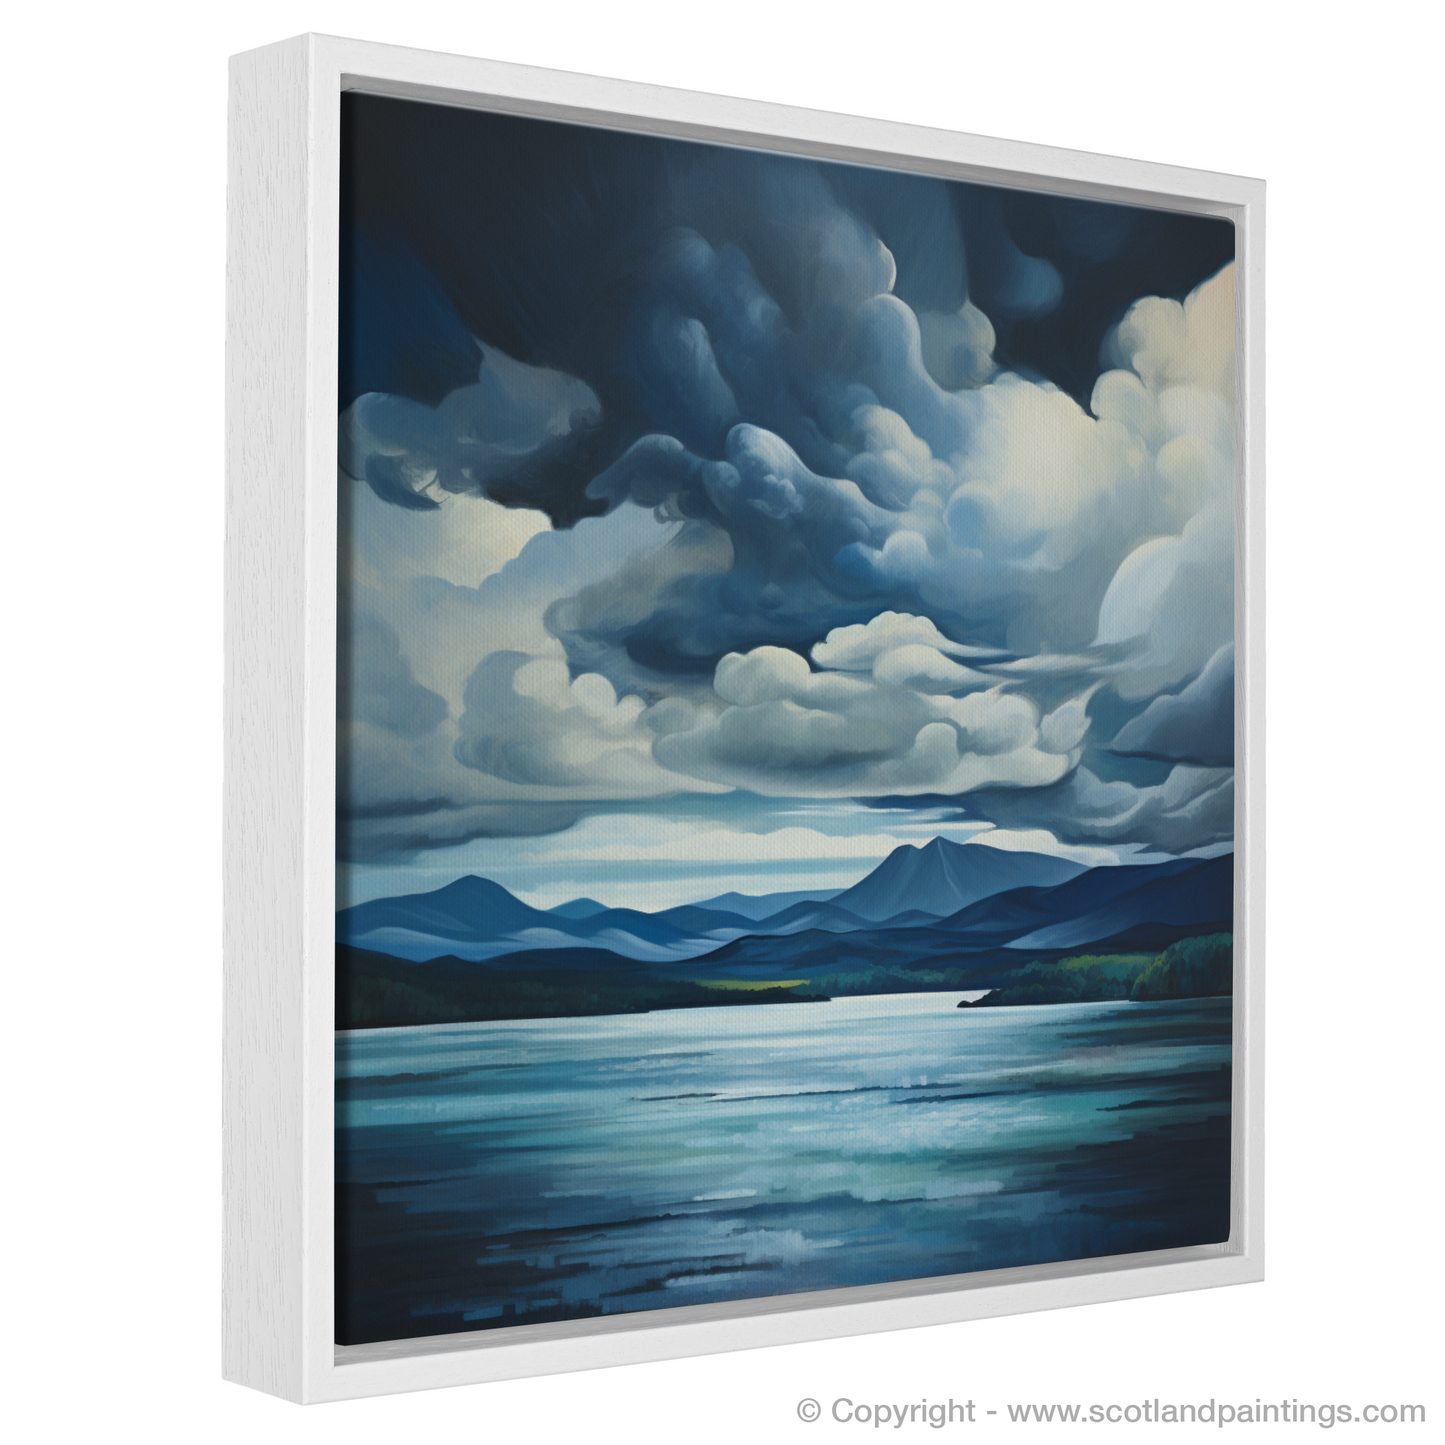 Painting and Art Print of Storm clouds above Loch Lomond entitled "Storm Clouds Dance Over Loch Lomond".